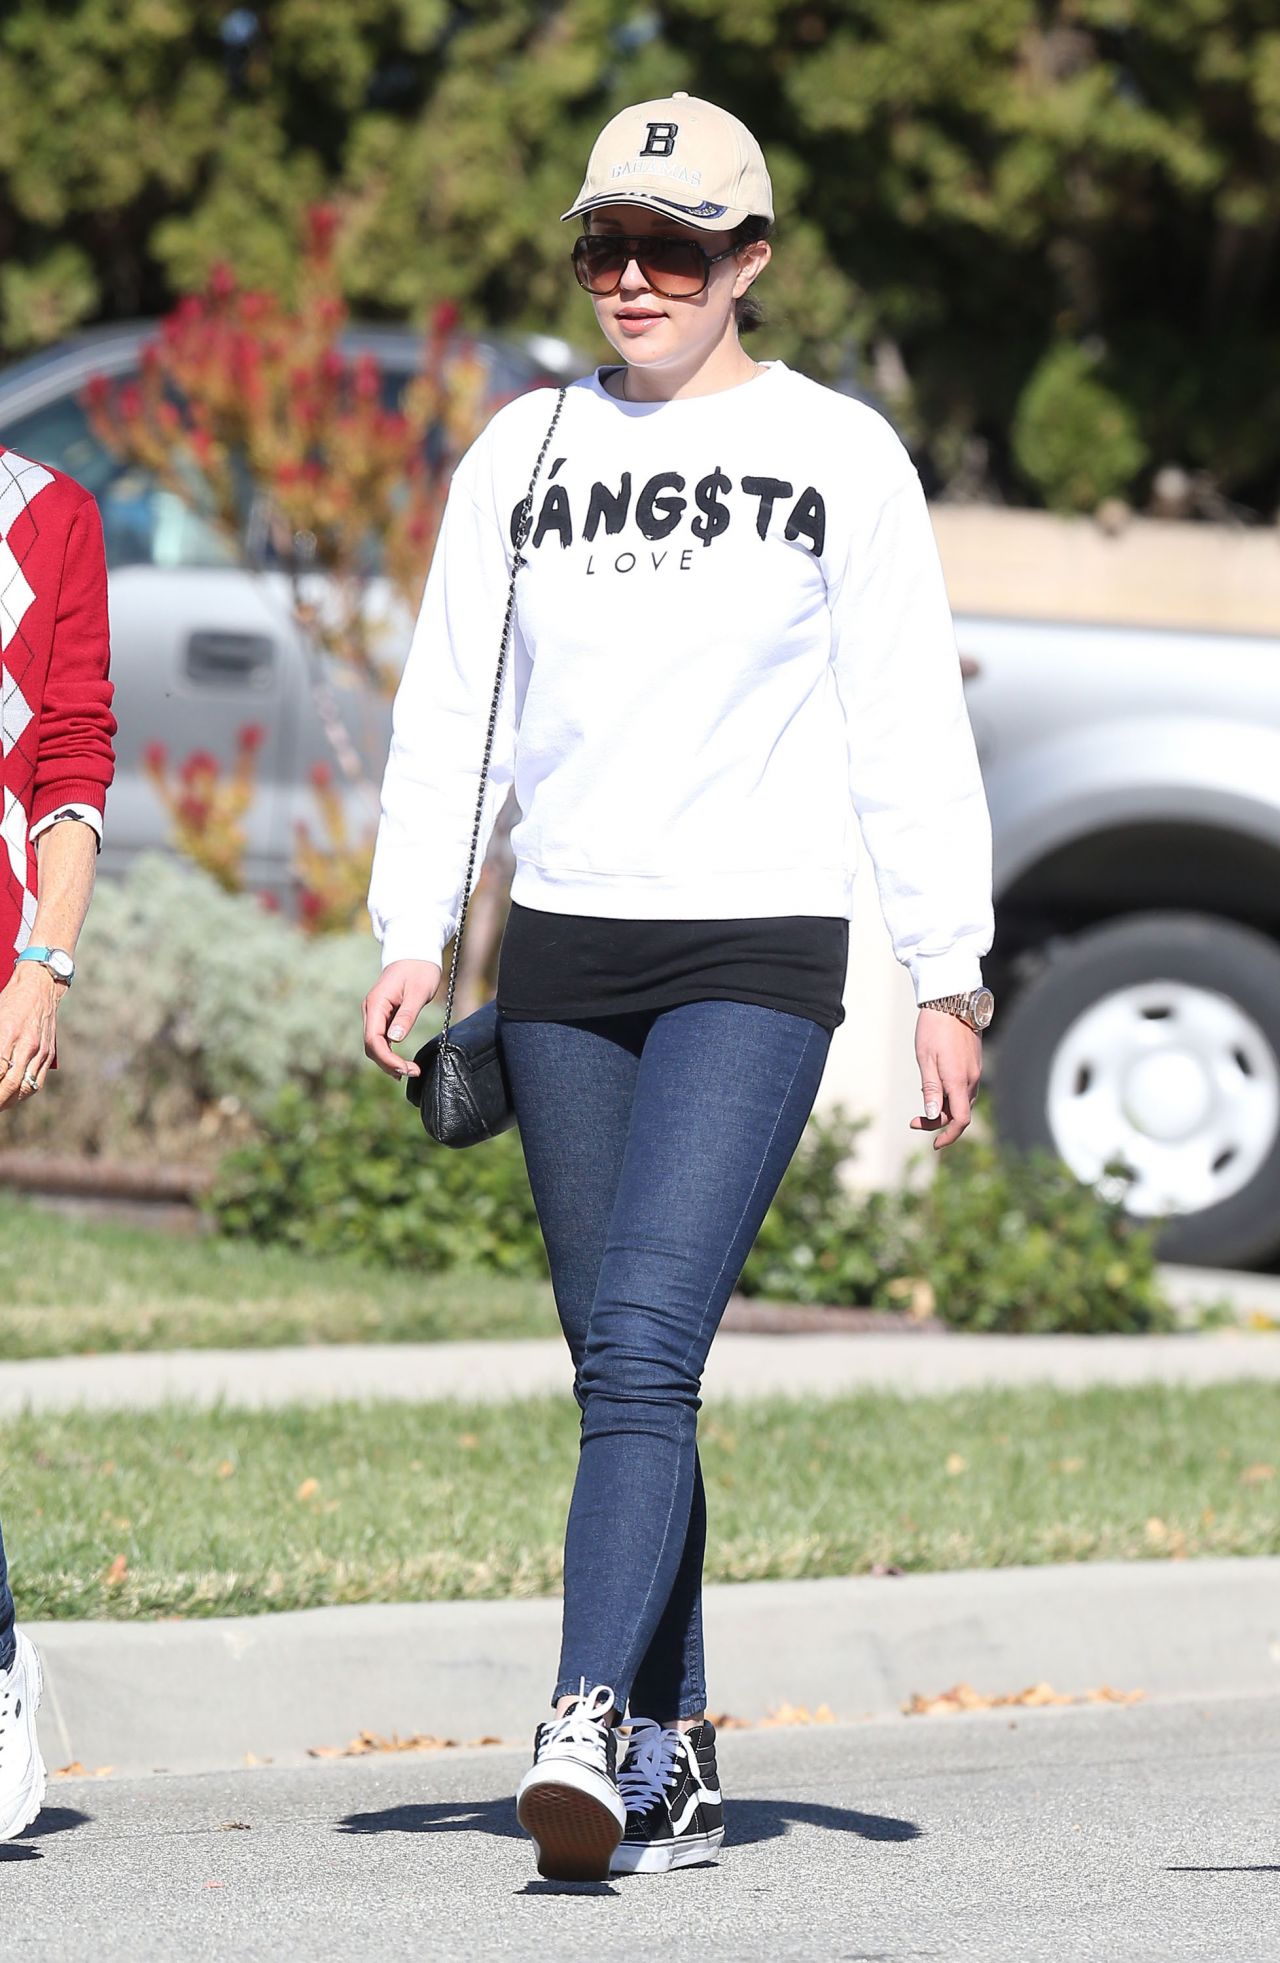 Amanda Bynes Street Style - Out in Thousand Oaks - December 2013